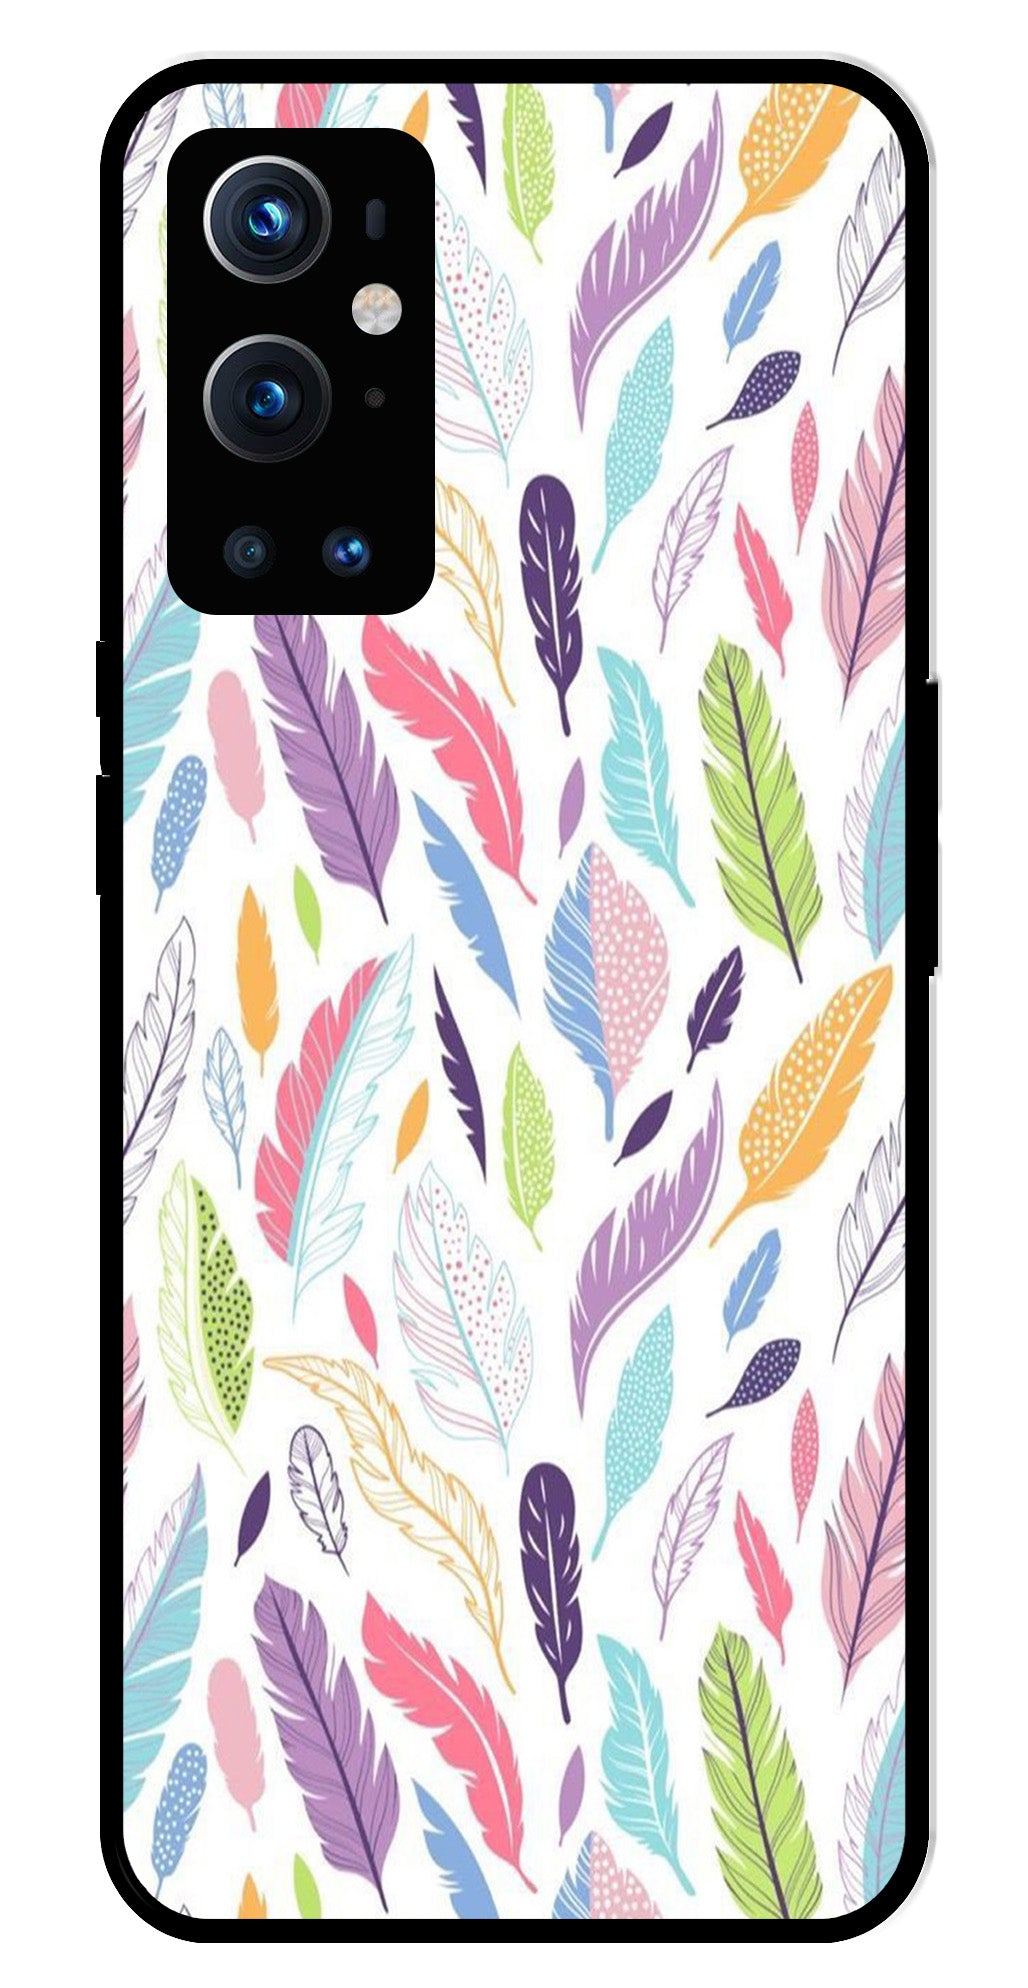 Colorful Feathers Metal Mobile Case for OnePlus 9 Pro